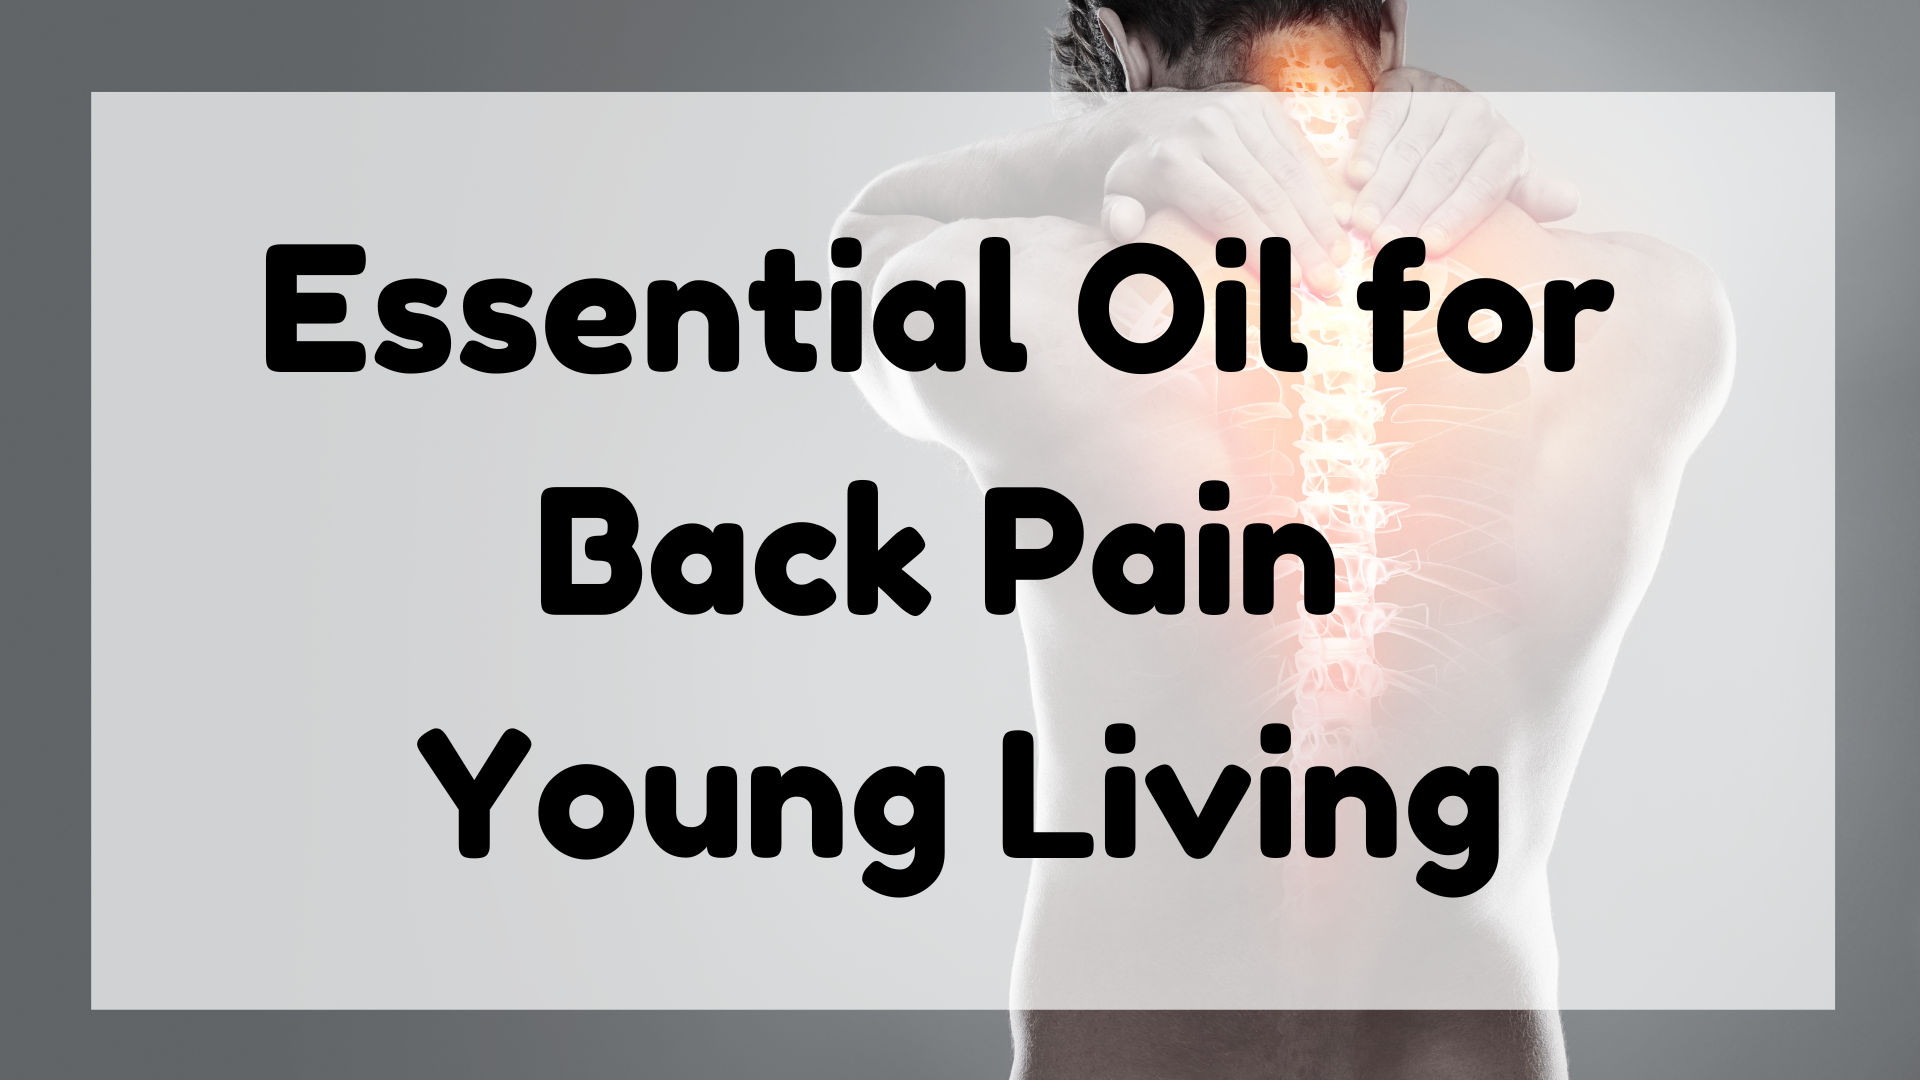 Essential Oil for Back Pain Young Living featured image